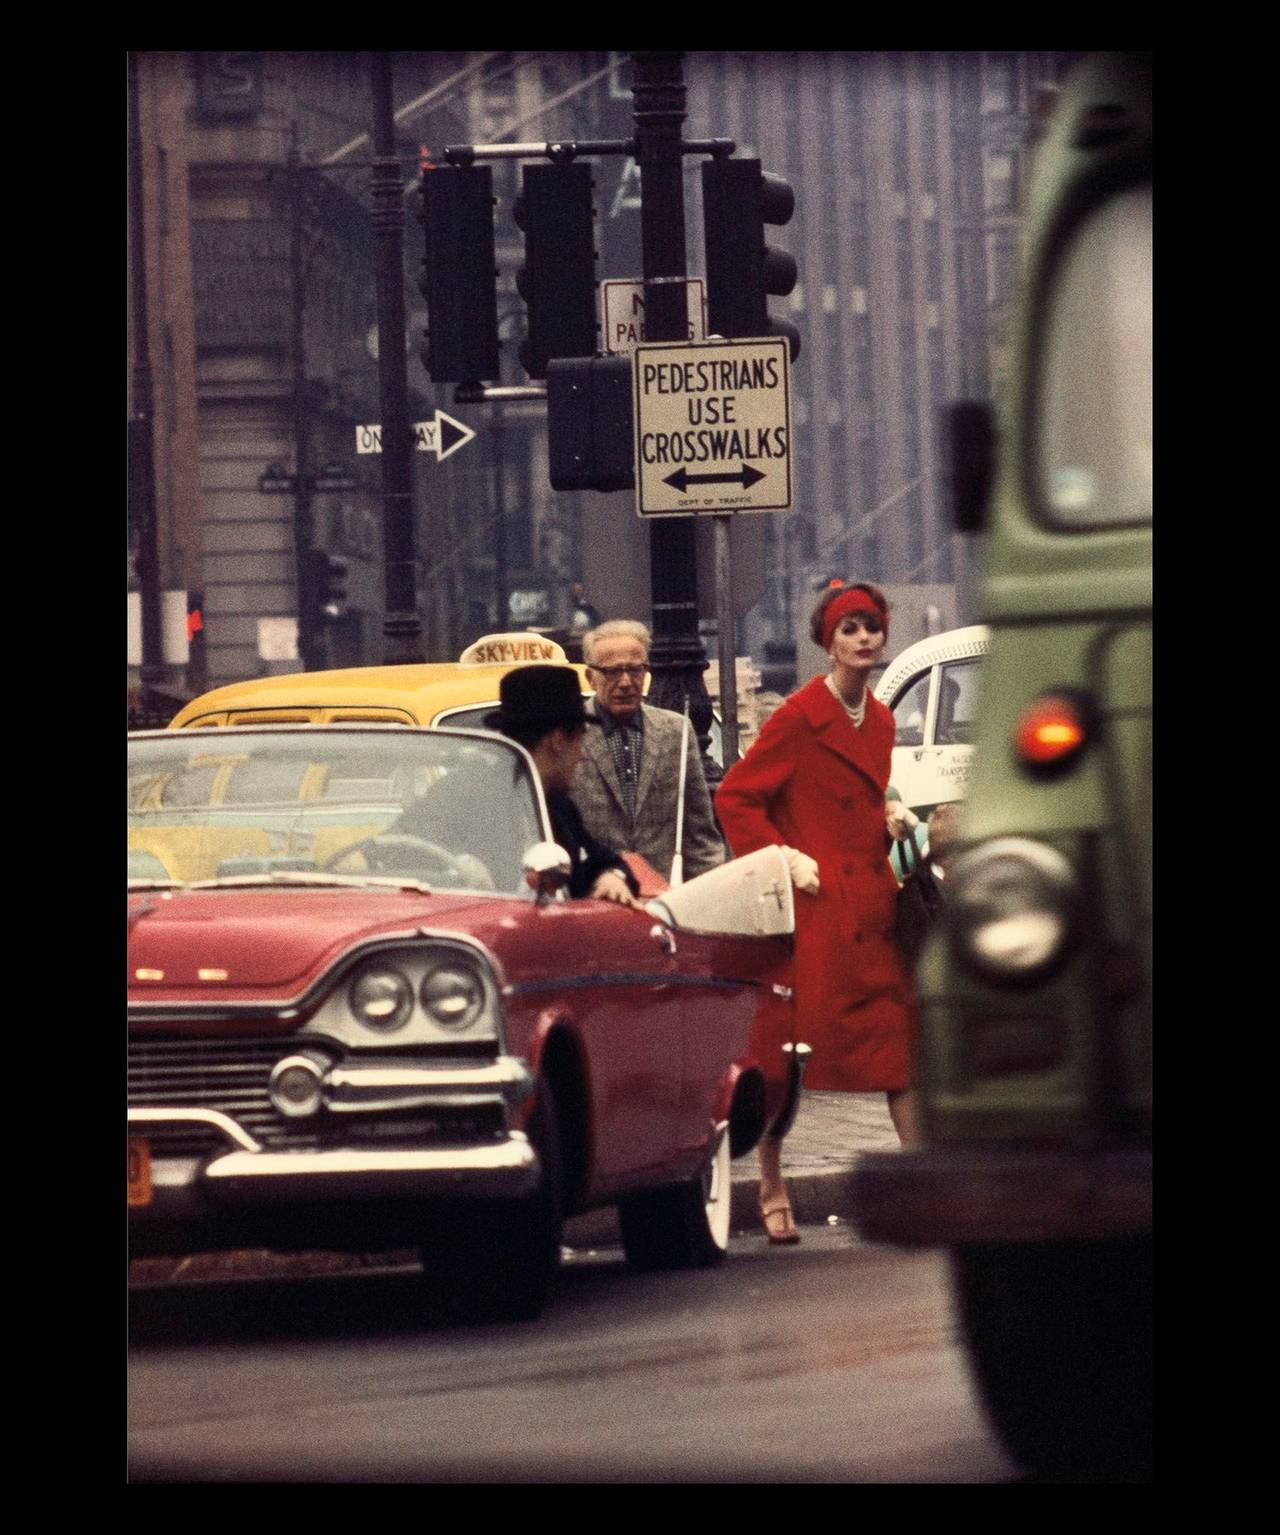 Color Photograph William Klein - Anne St. Marie + Cruiser in Traffic, NY (Vogue)